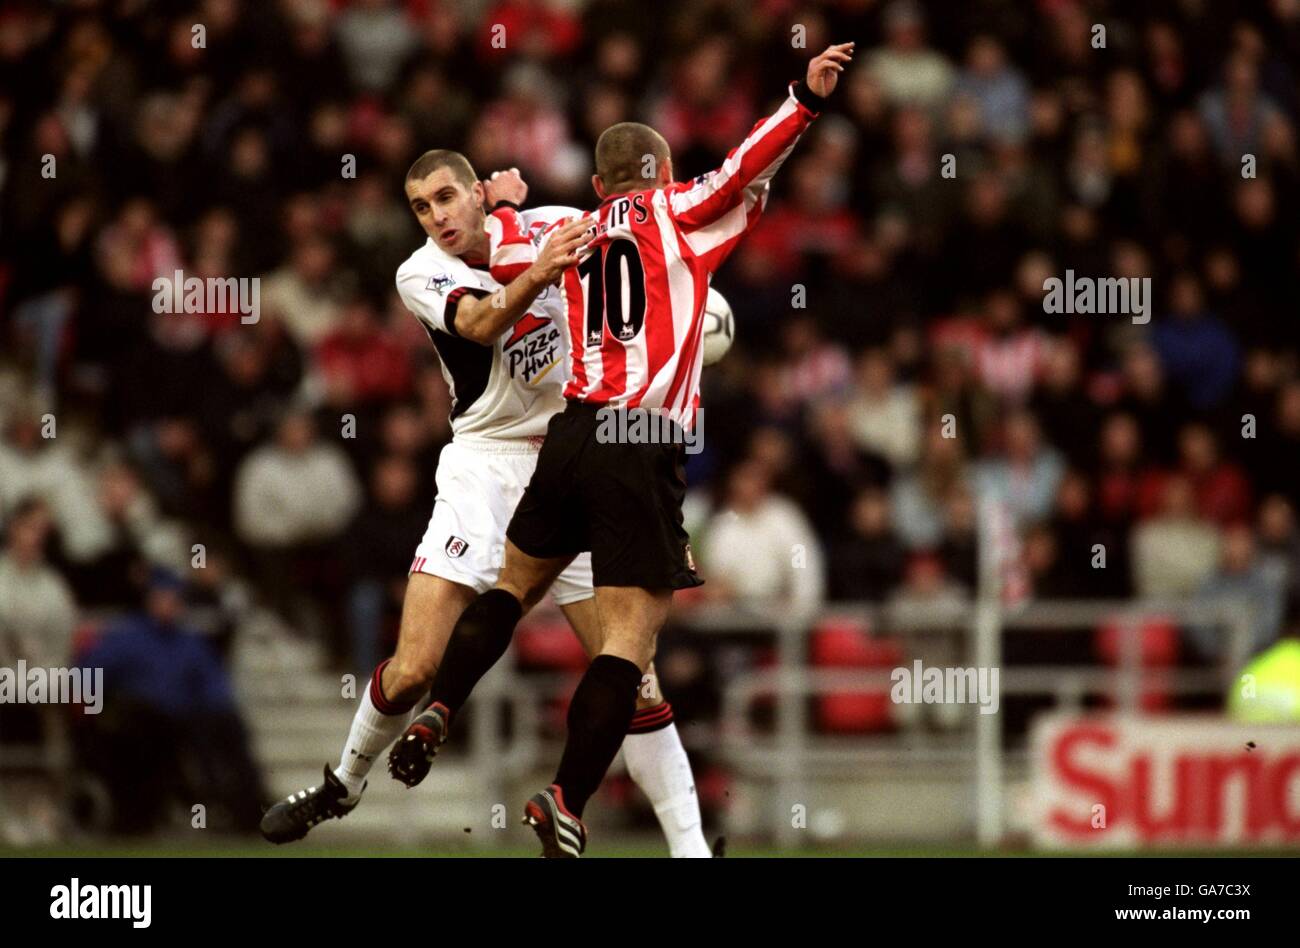 Fulham's Andy Melville battles for the ball in the air with Sunderland's Kevin Phillips Stock Photo